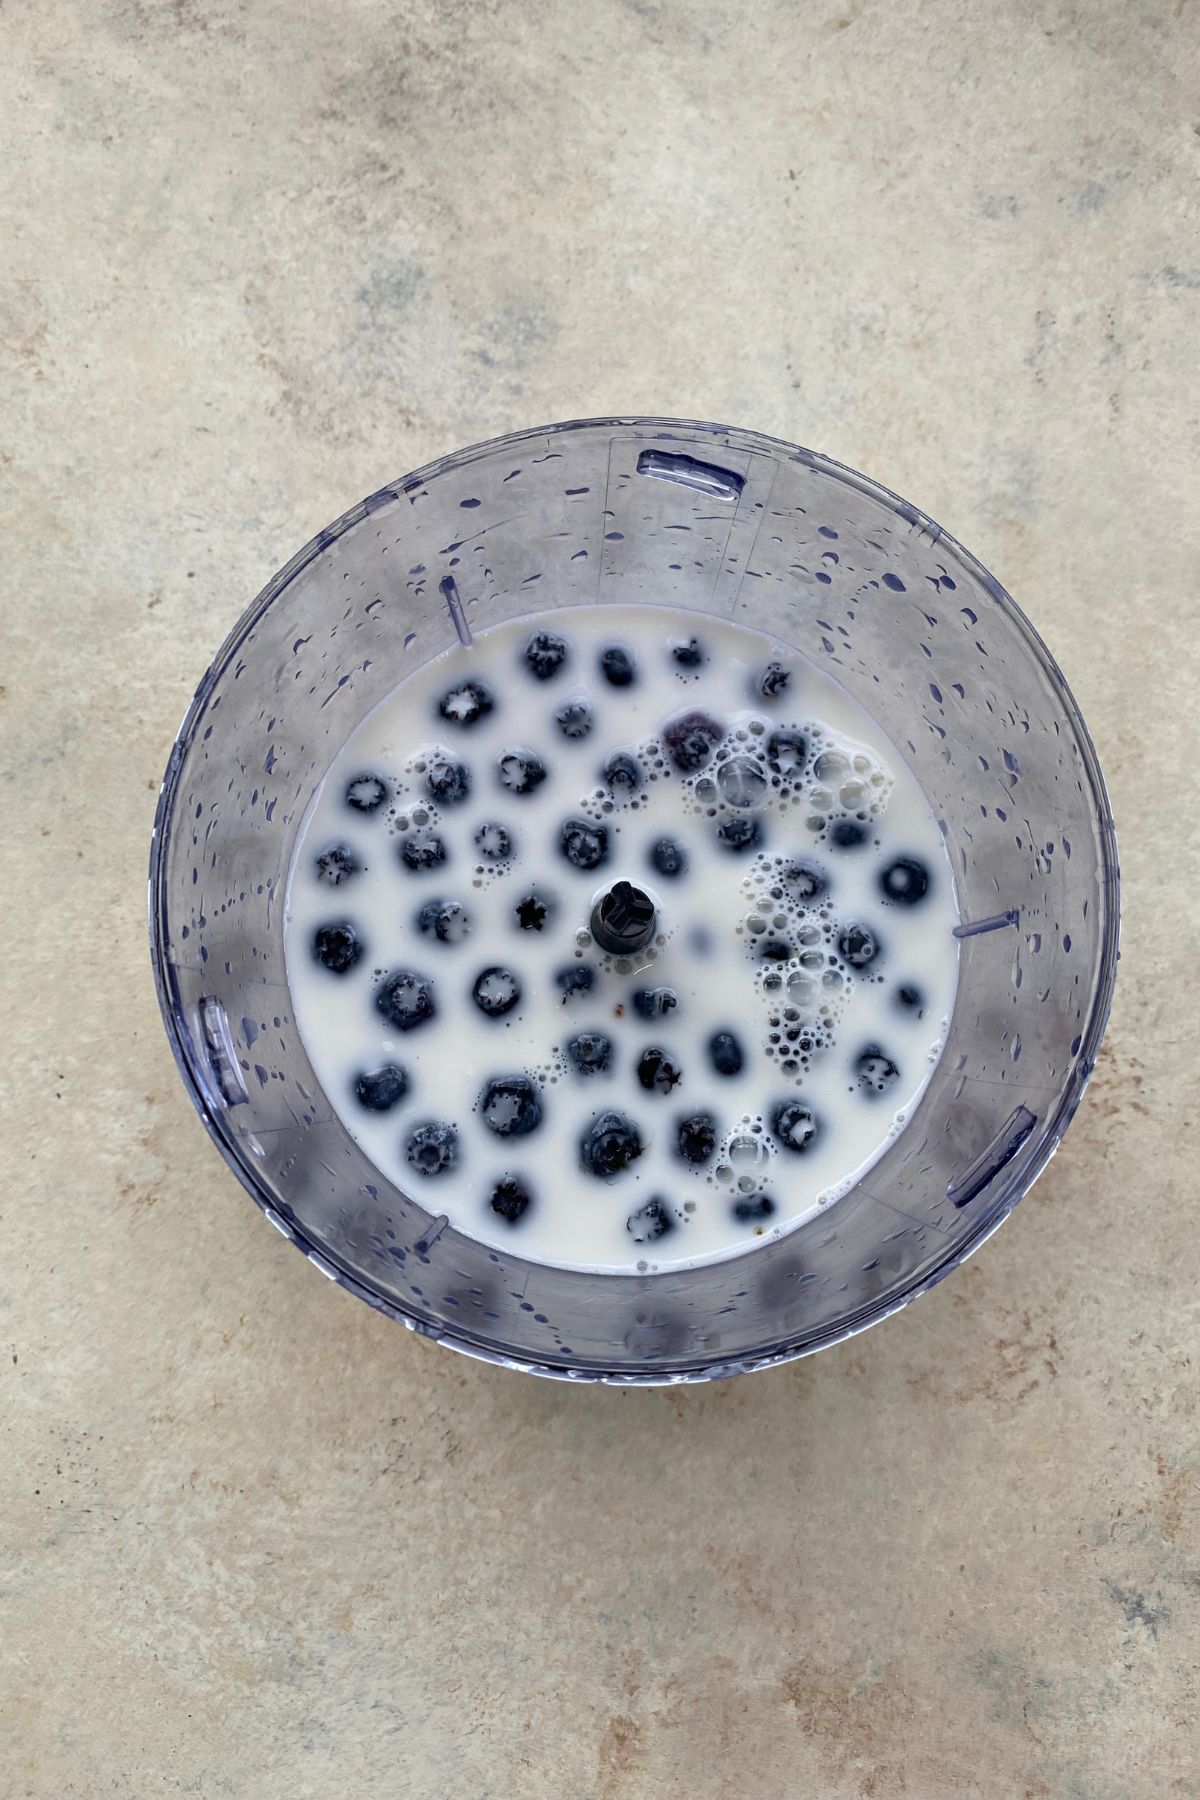 A bowl filled with blueberries and a scoop of blueberry ice cream.